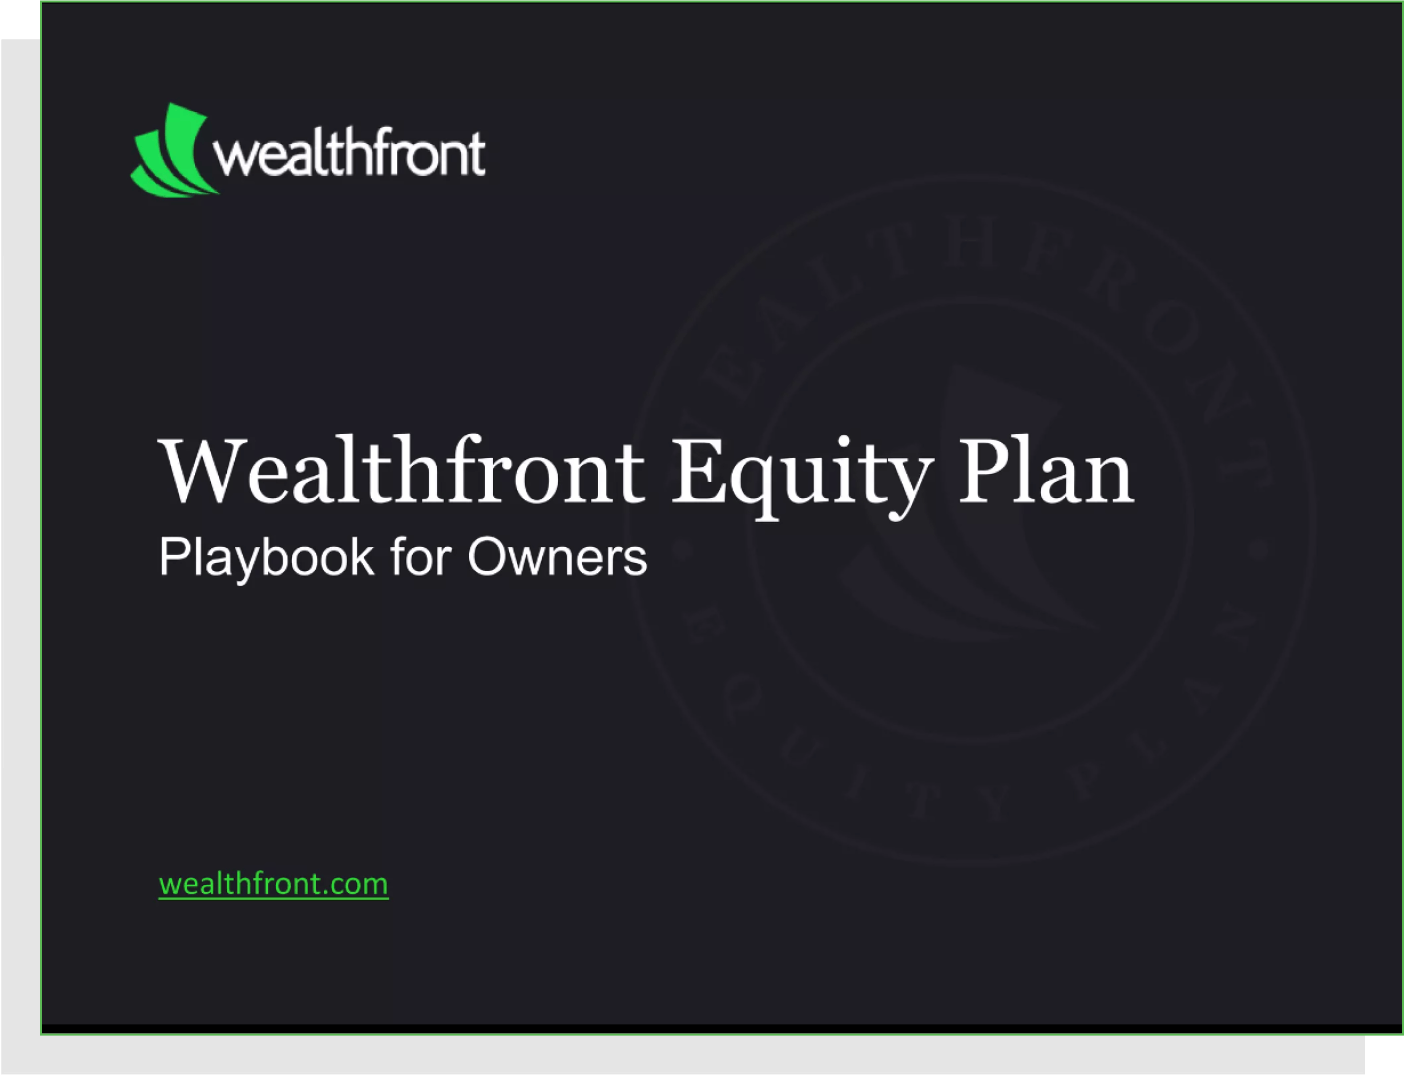 Wealthfront equity plan, front cover